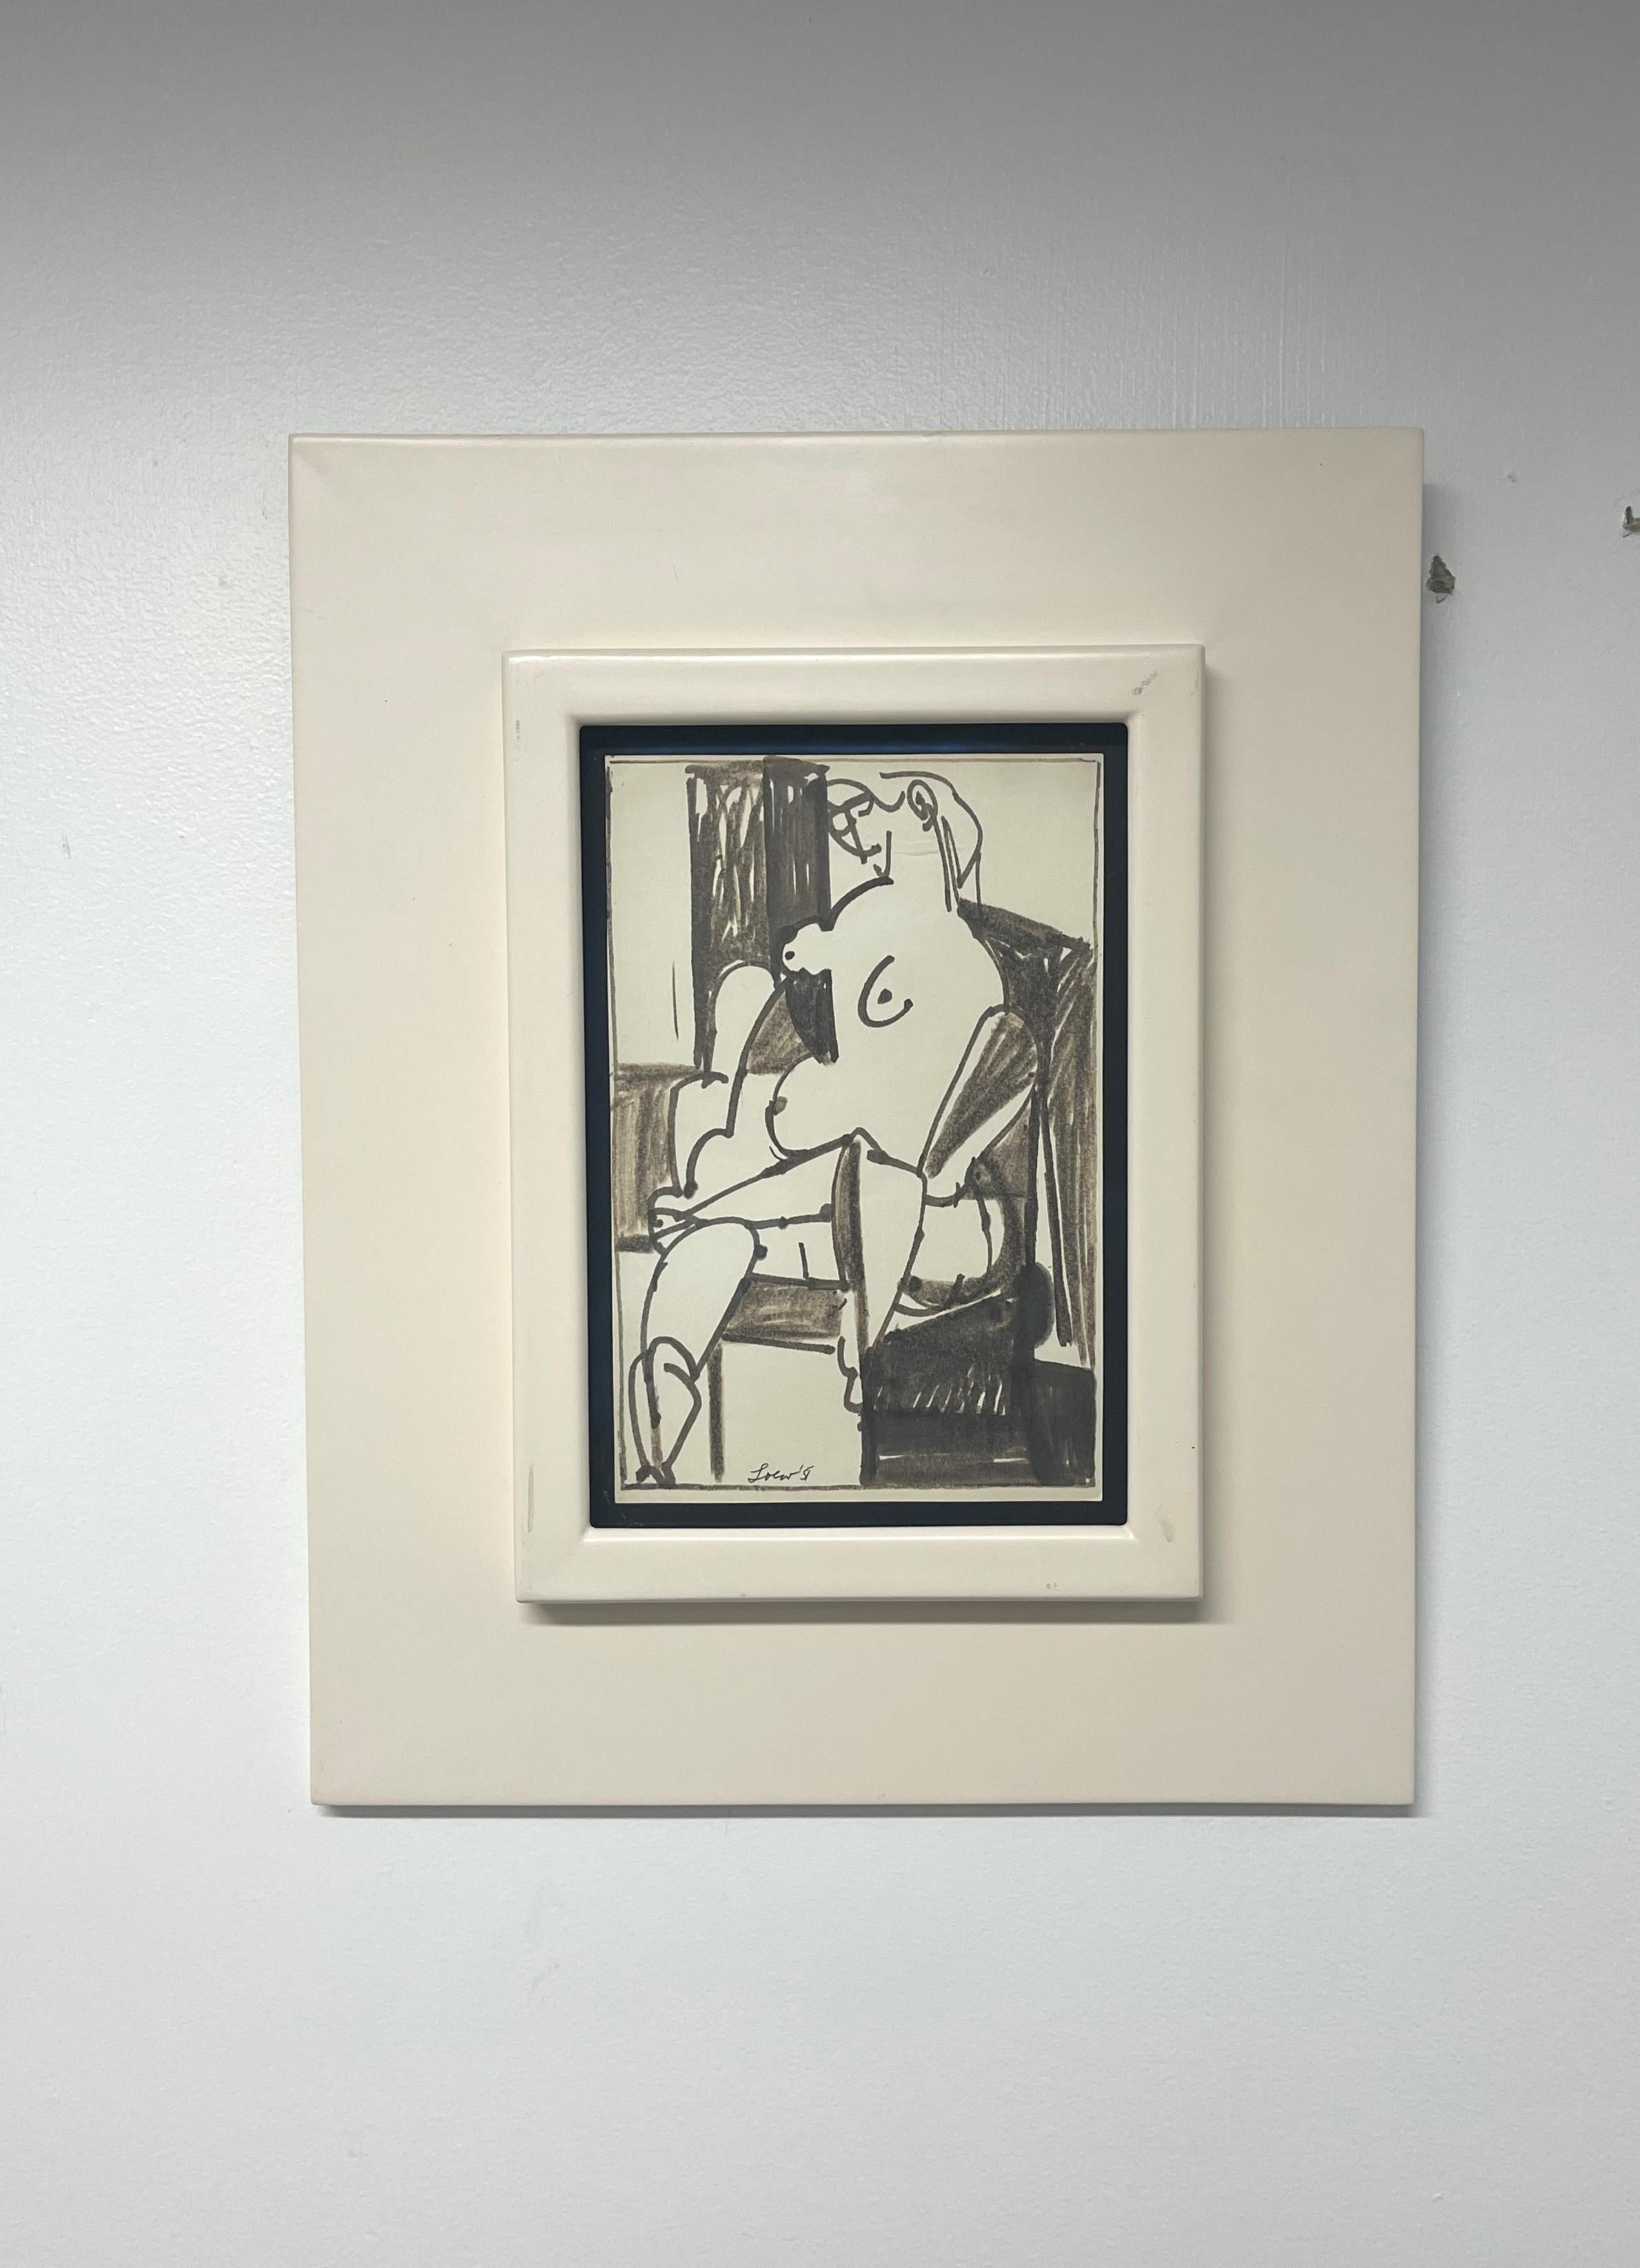 India Ink on paper;  Provenance: Estate of artist, Vincent Vallarino Gallery

Lawrence Fine Art is pleased to present a suite of early, cubist-inspired nudes by first generation abstract expressionist painter Michael Loew, each different and